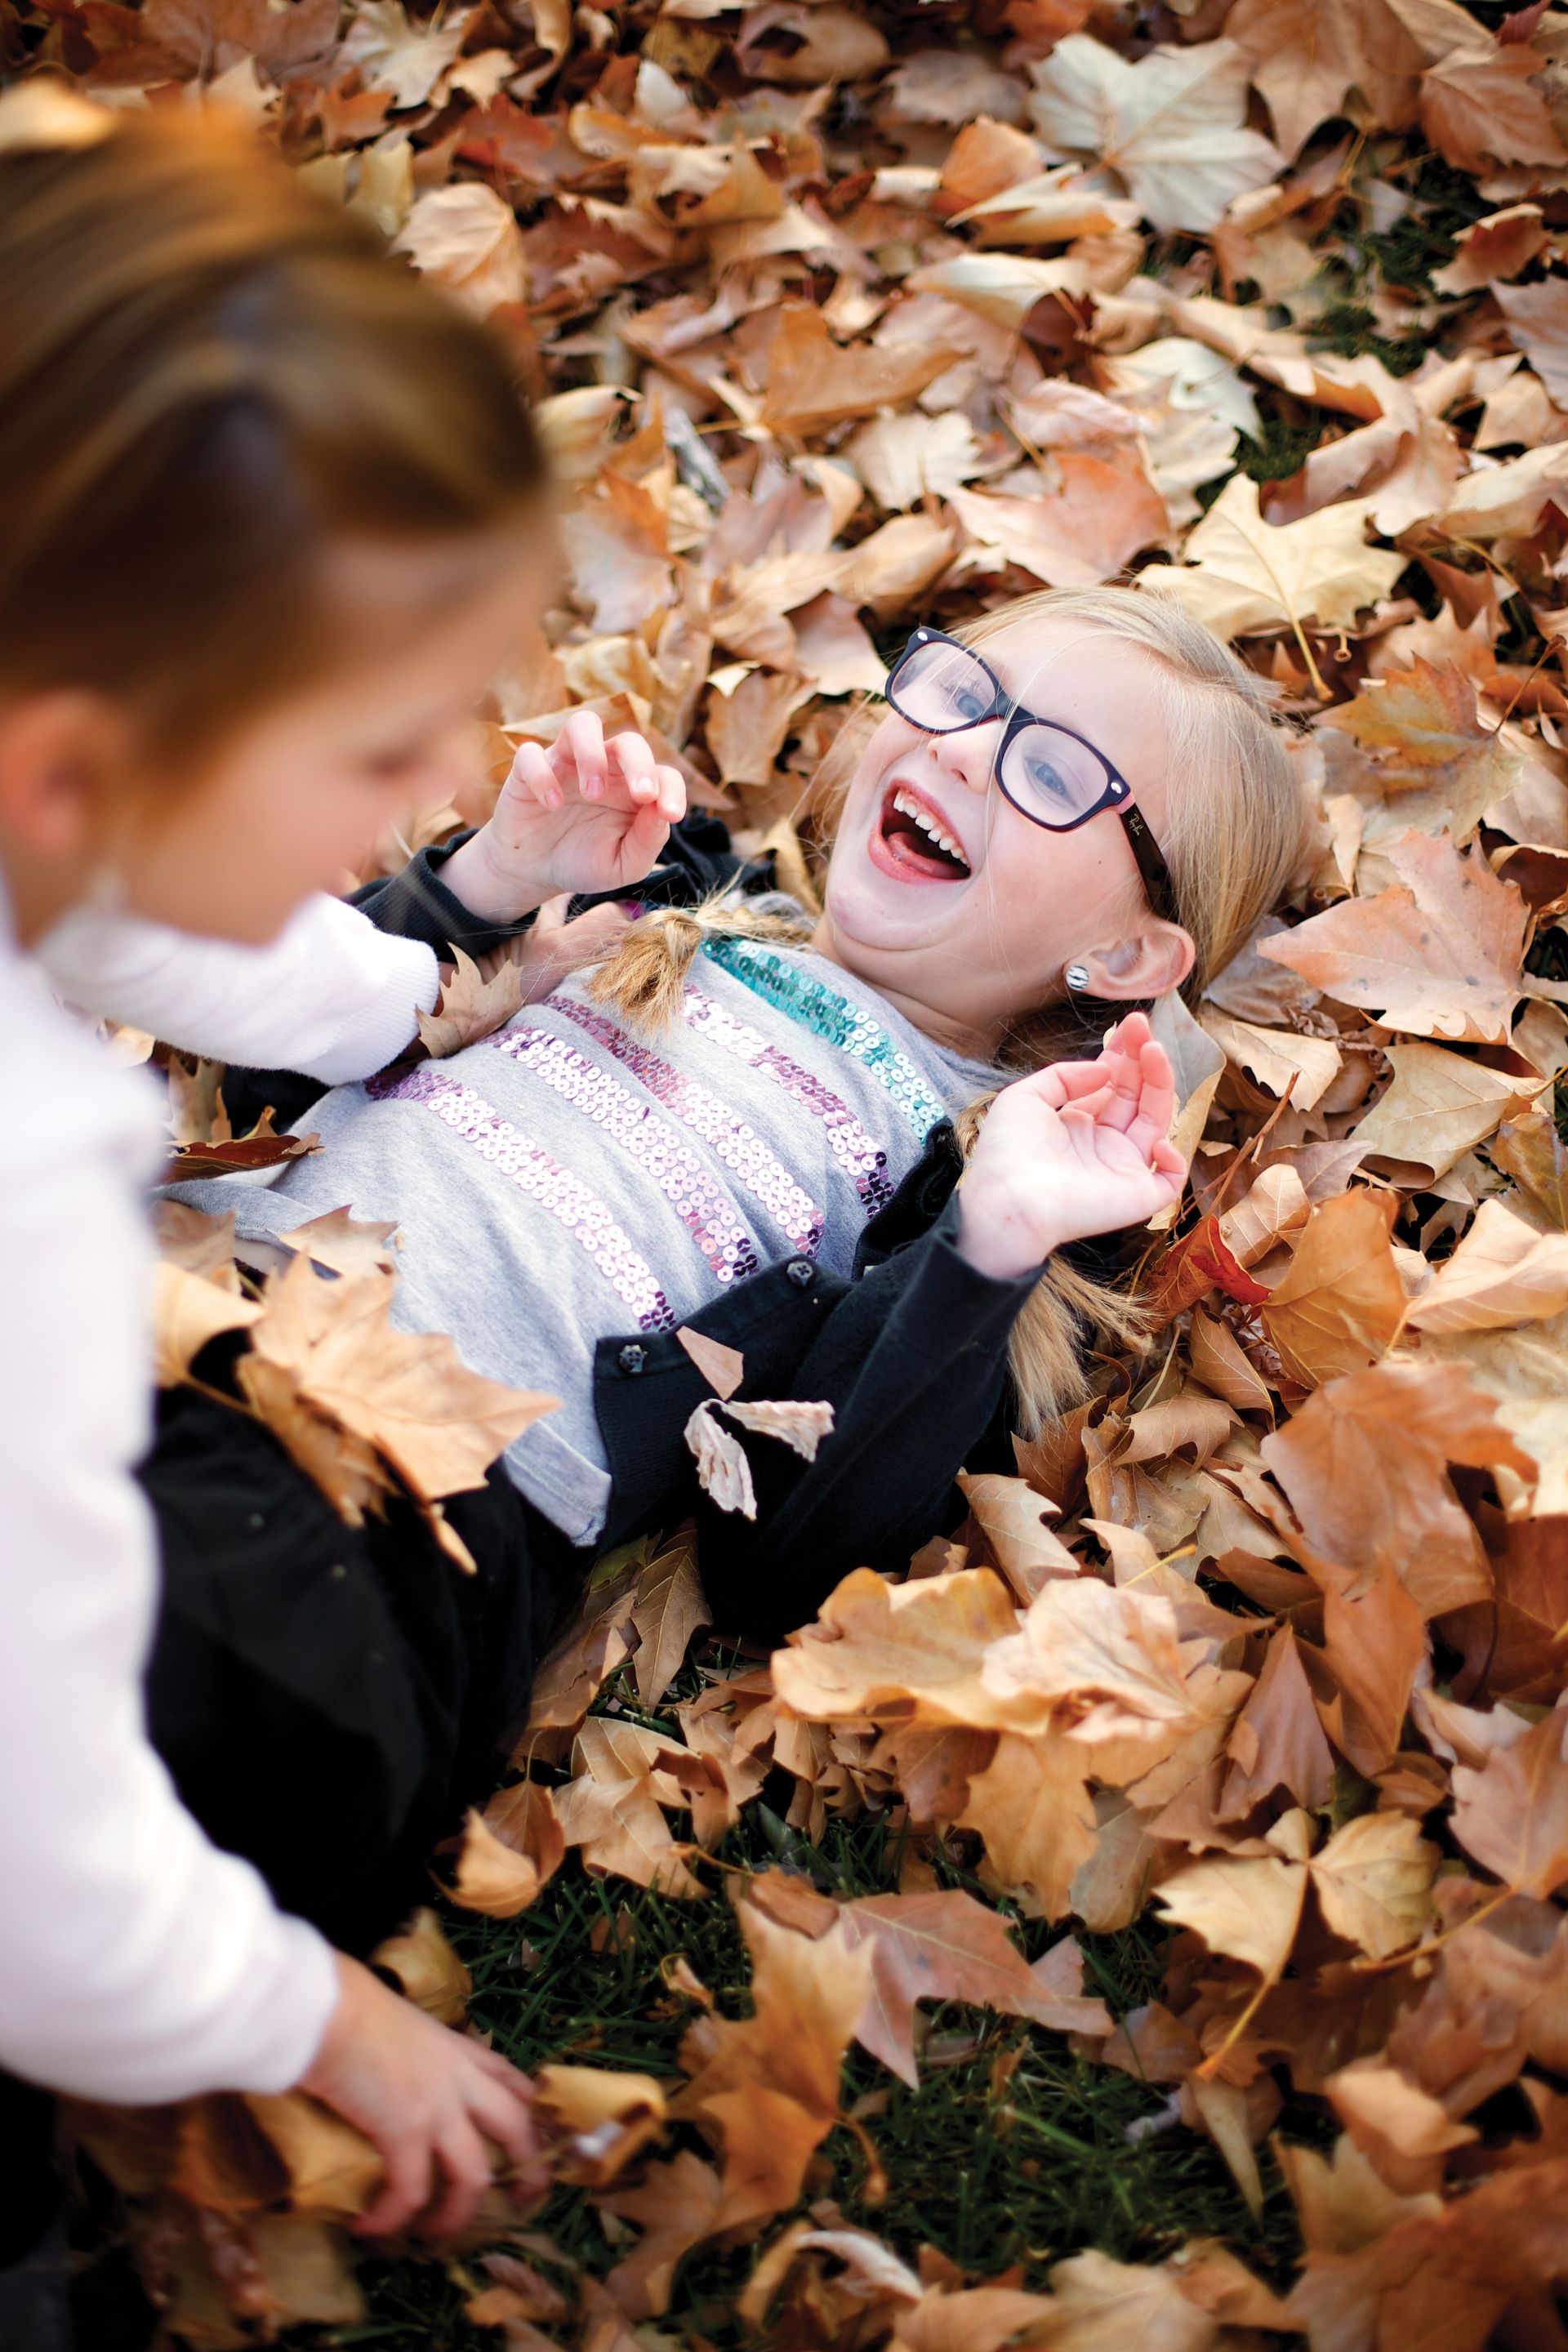 Two young girls are playing outside in a pile of leaves.